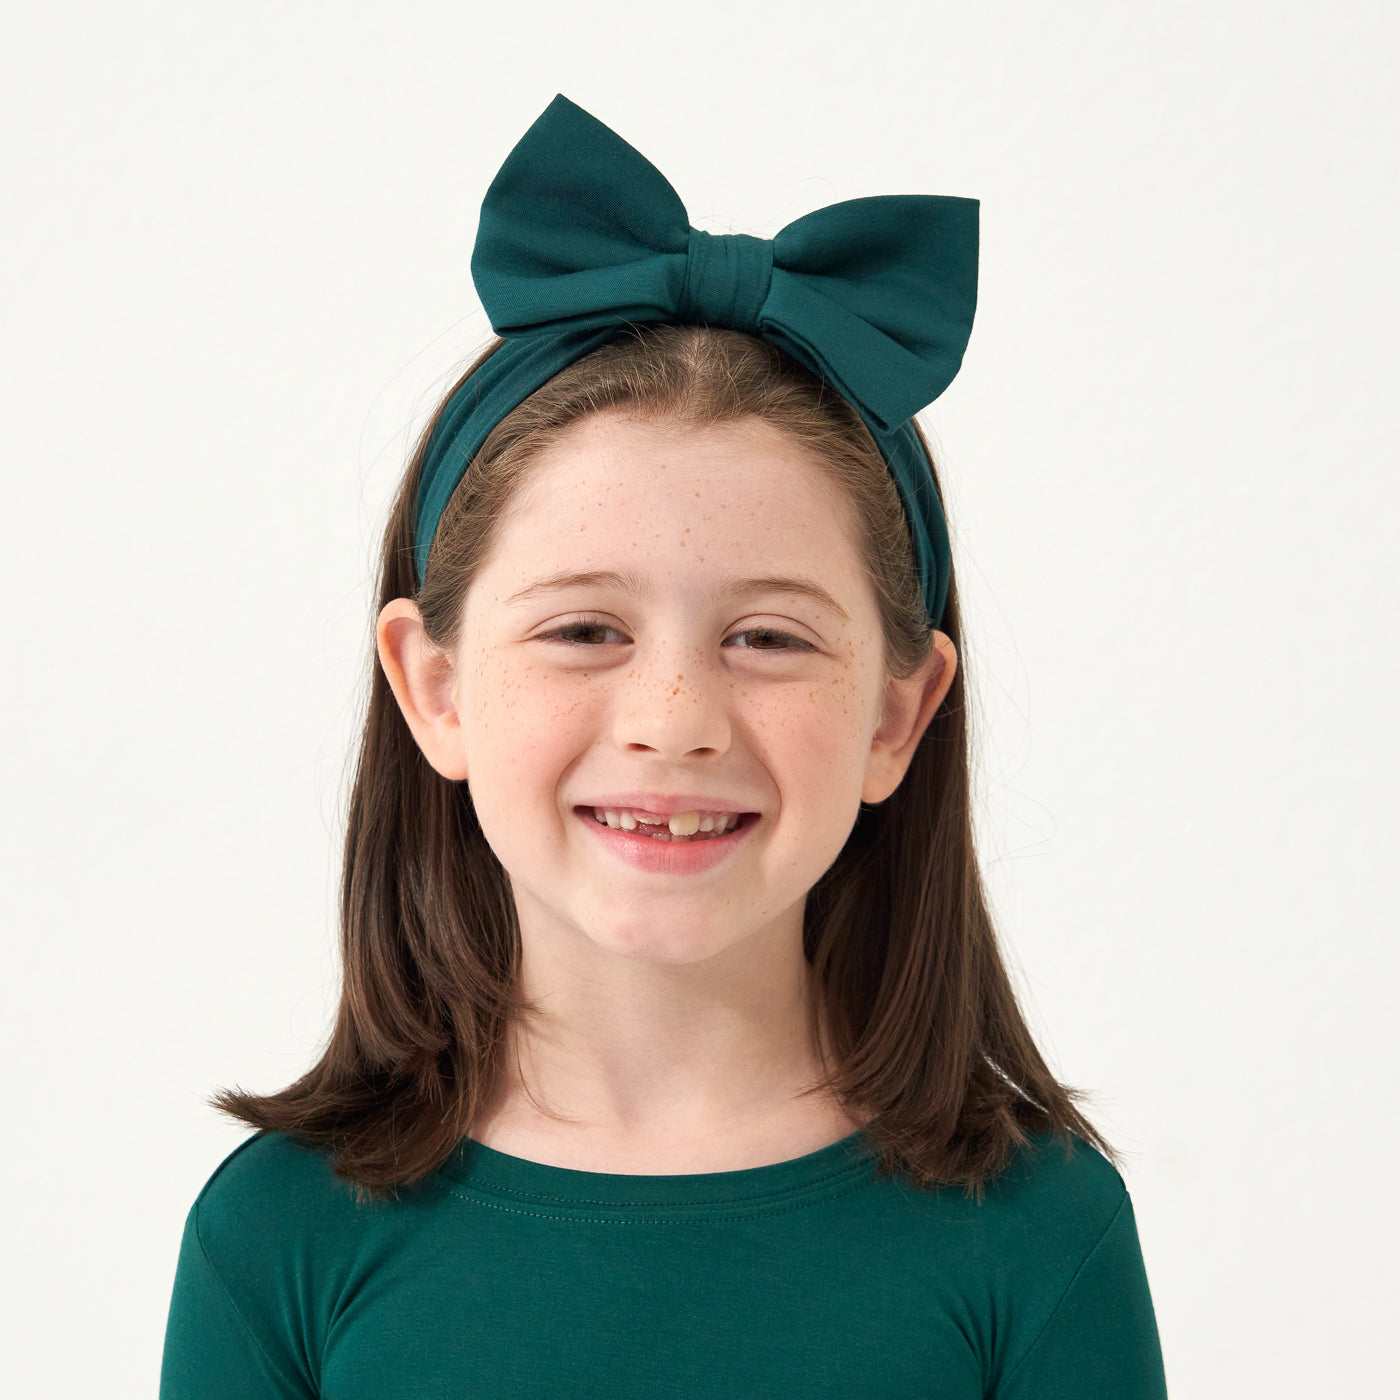 Close up image of a child wearing an Emerald luxe bow headband and matching pajamas